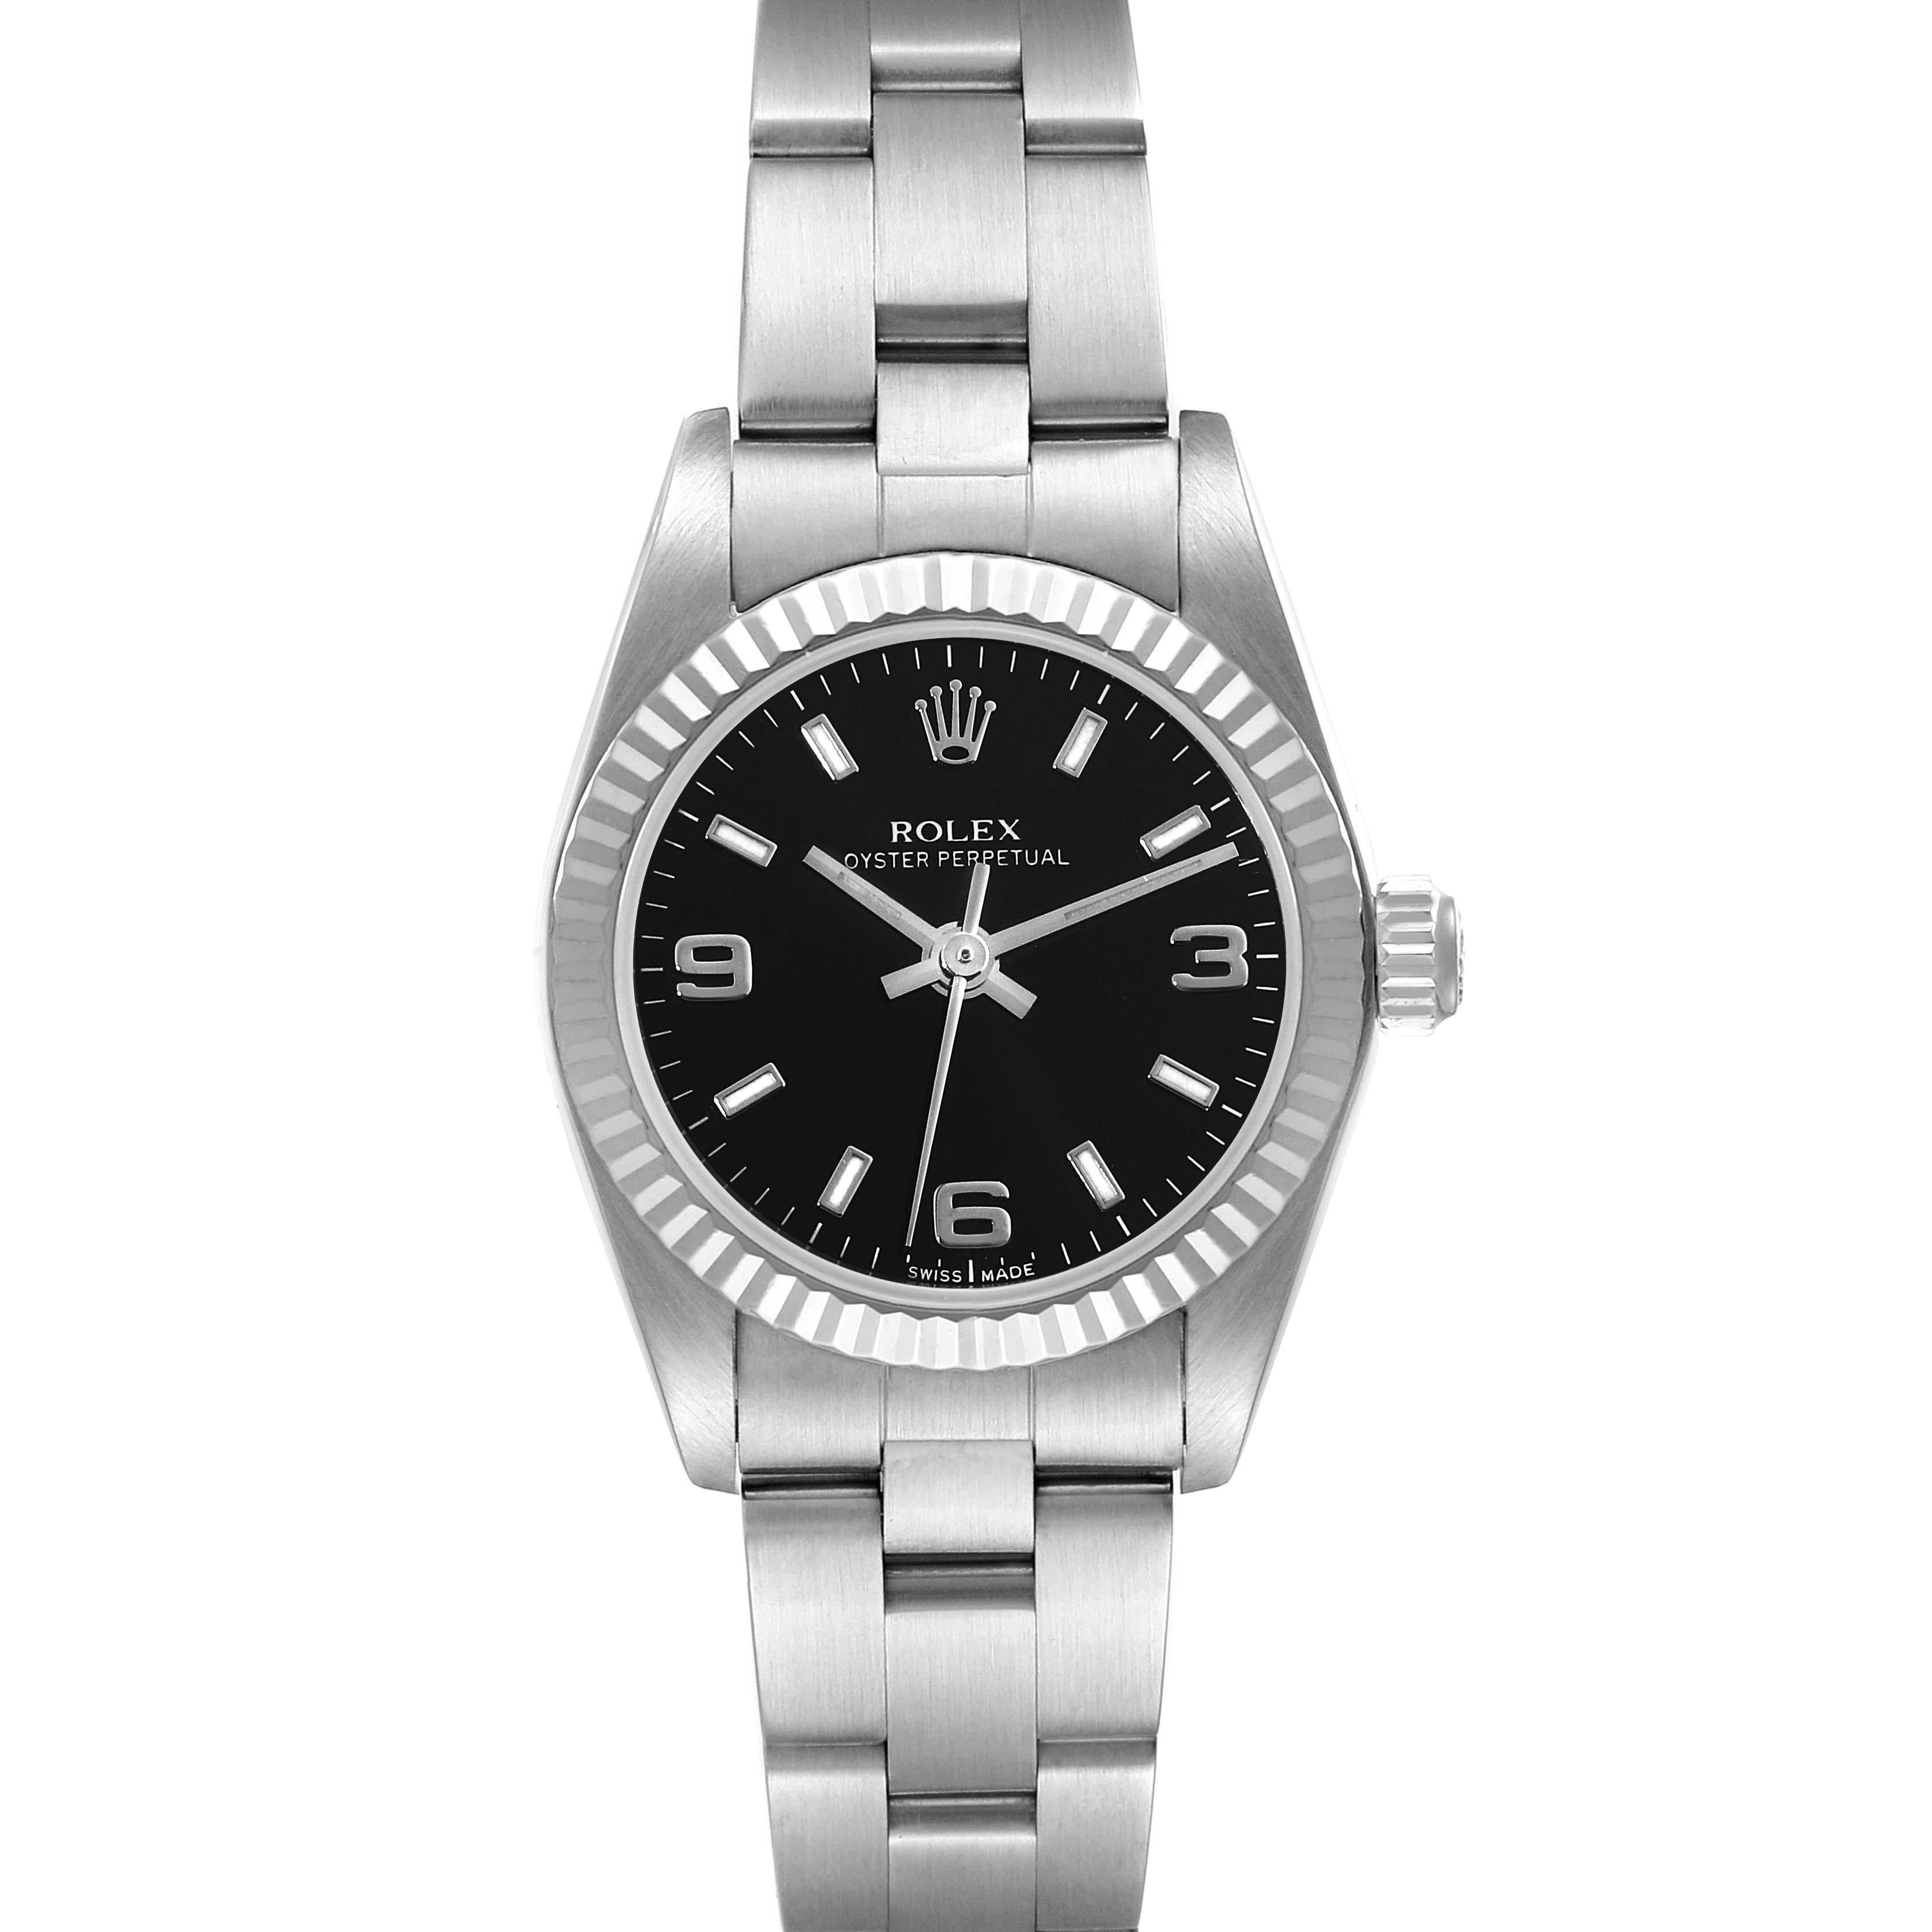 Rolex Oyster Perpetual Steel White Gold Ladies Watch 76094 Box Papers. Officially certified chronometer automatic self-winding movement. Stainless steel oyster case 24.0 mm in diameter. Rolex logo on the crown. 18k white gold fluted bezel. Scratch